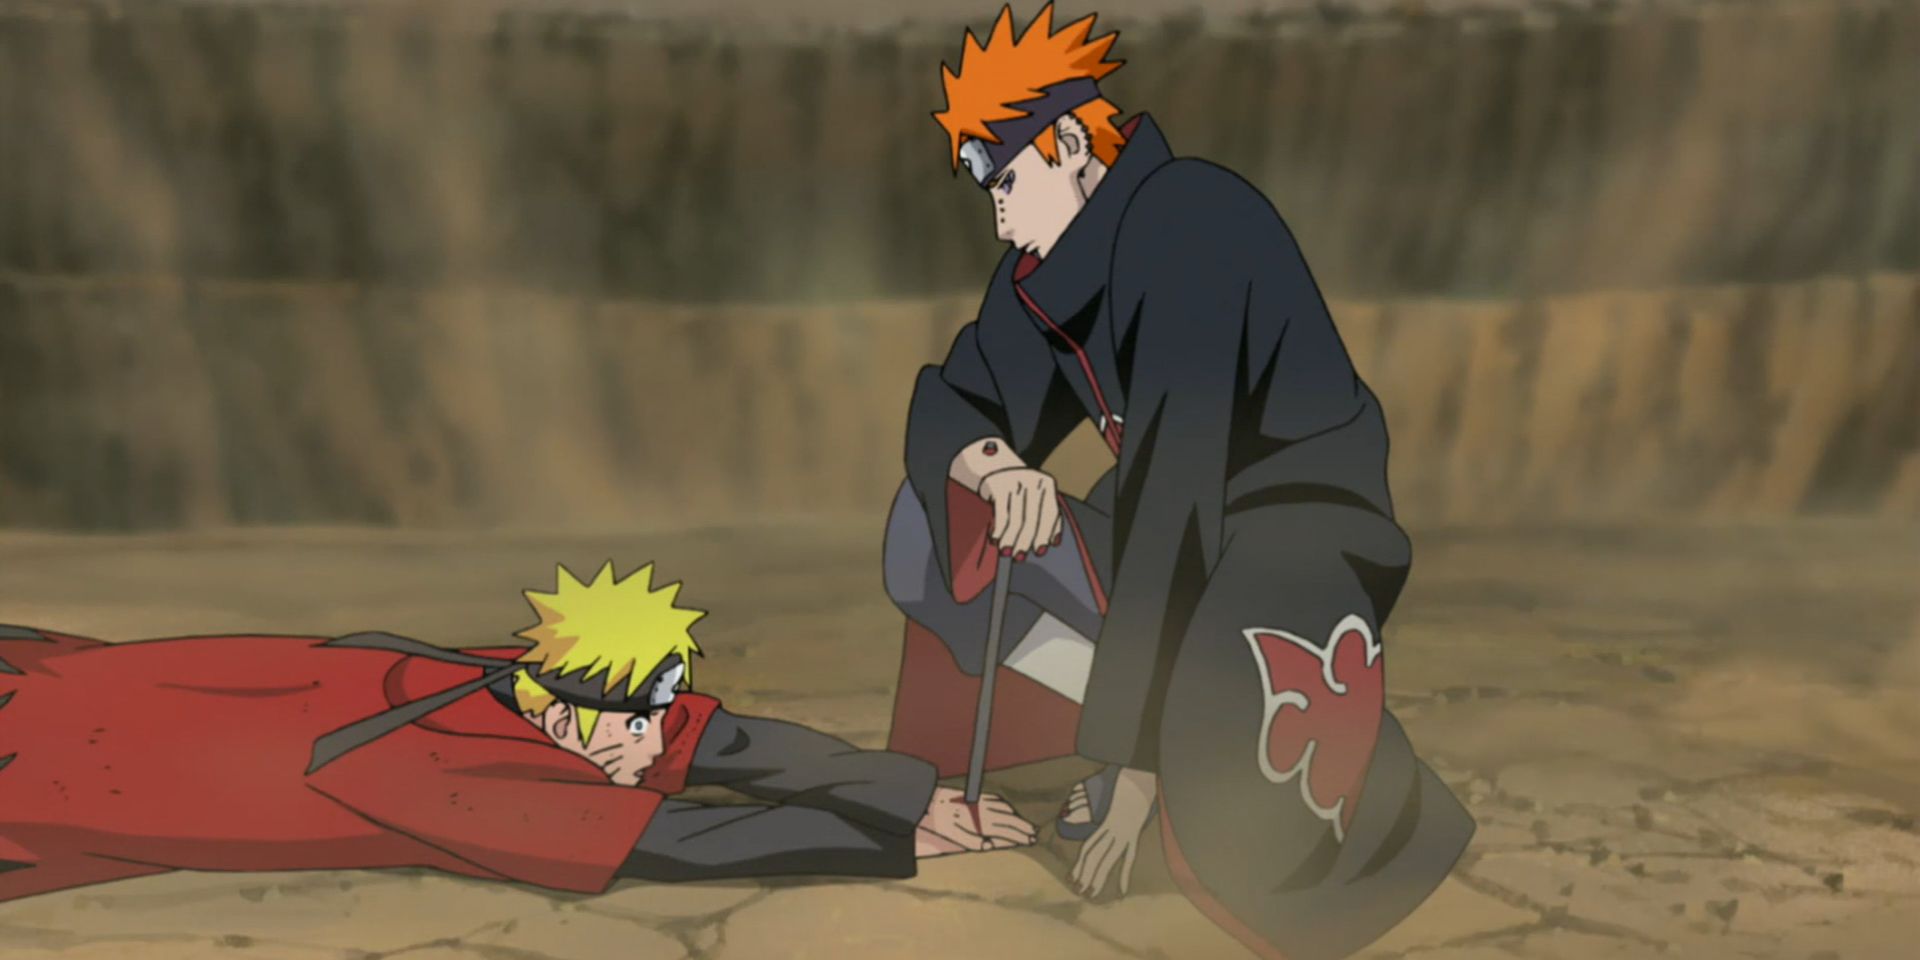 Pain impaling Naruto's hands and pinning him to the ground in Naruto.